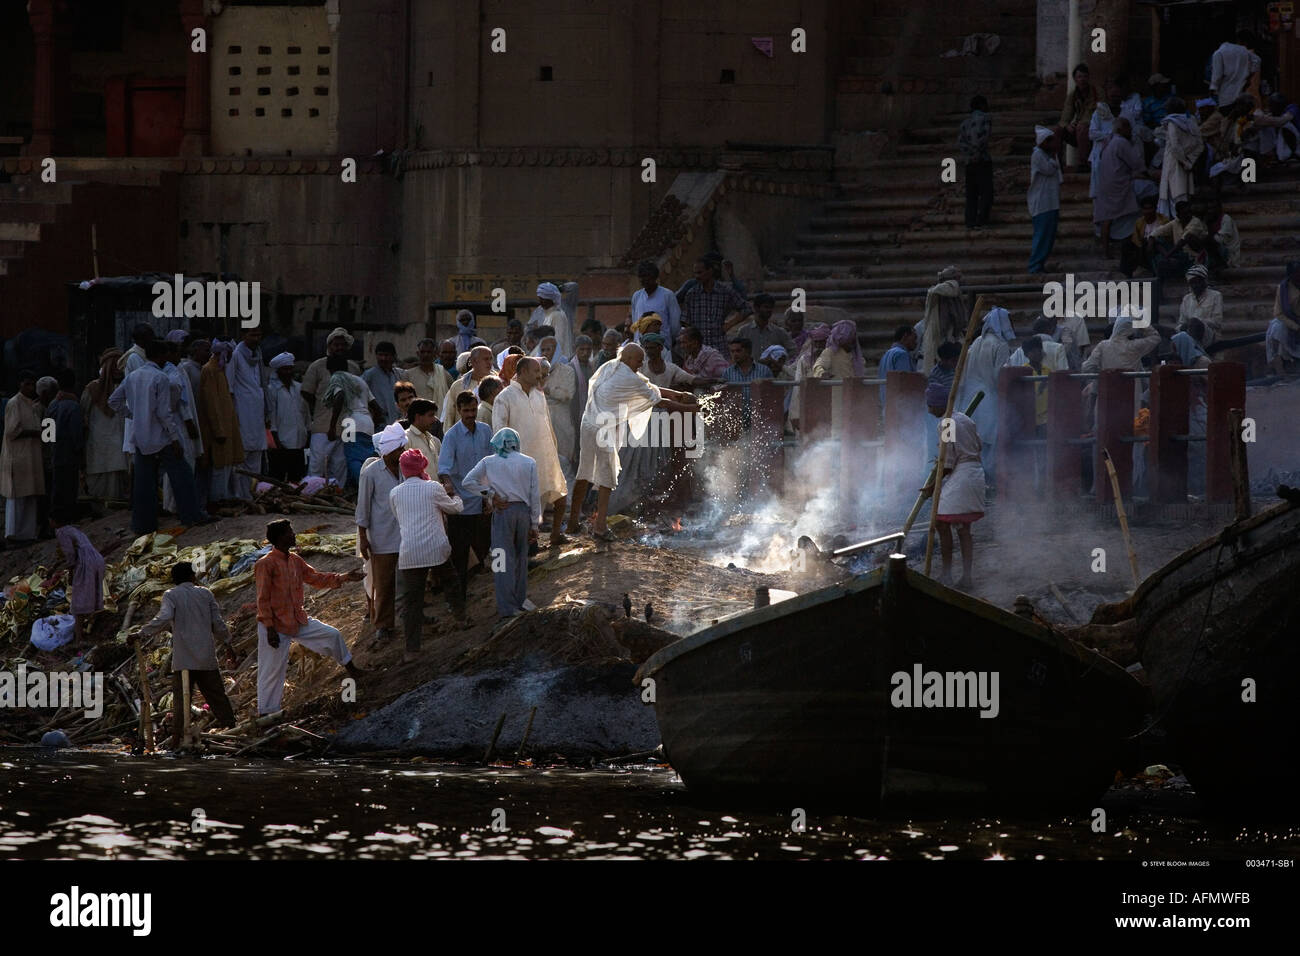 Pouring sacred Ganges water on the ashes at the cremation site on the banks of the Ganges Varanasi India Stock Photo